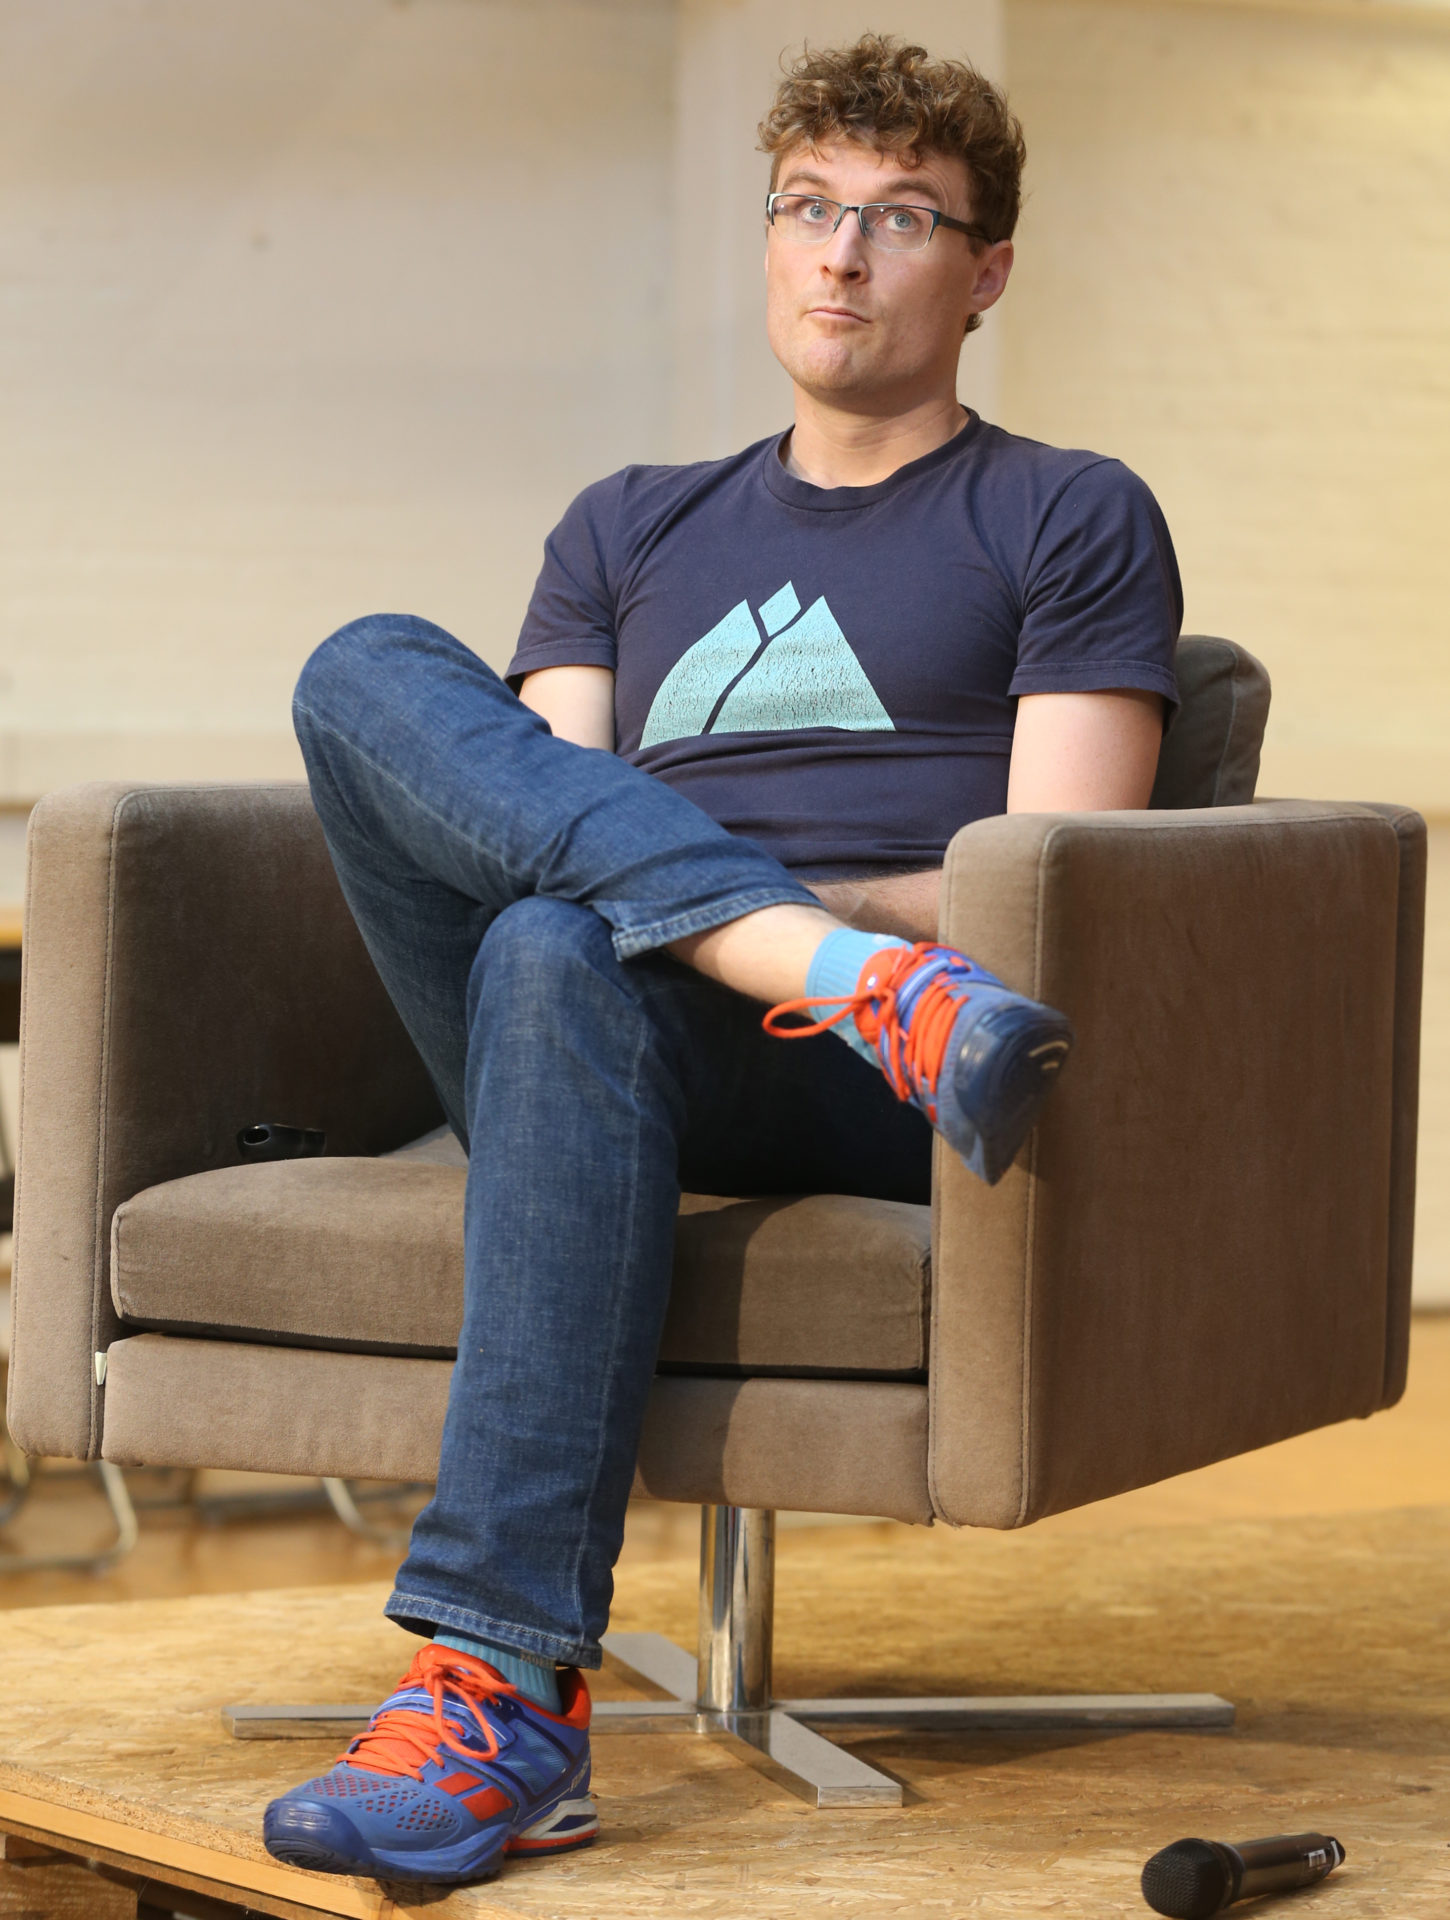 Web Summit founder Paddy Cosgrave at Web Summit HQ in Dublin